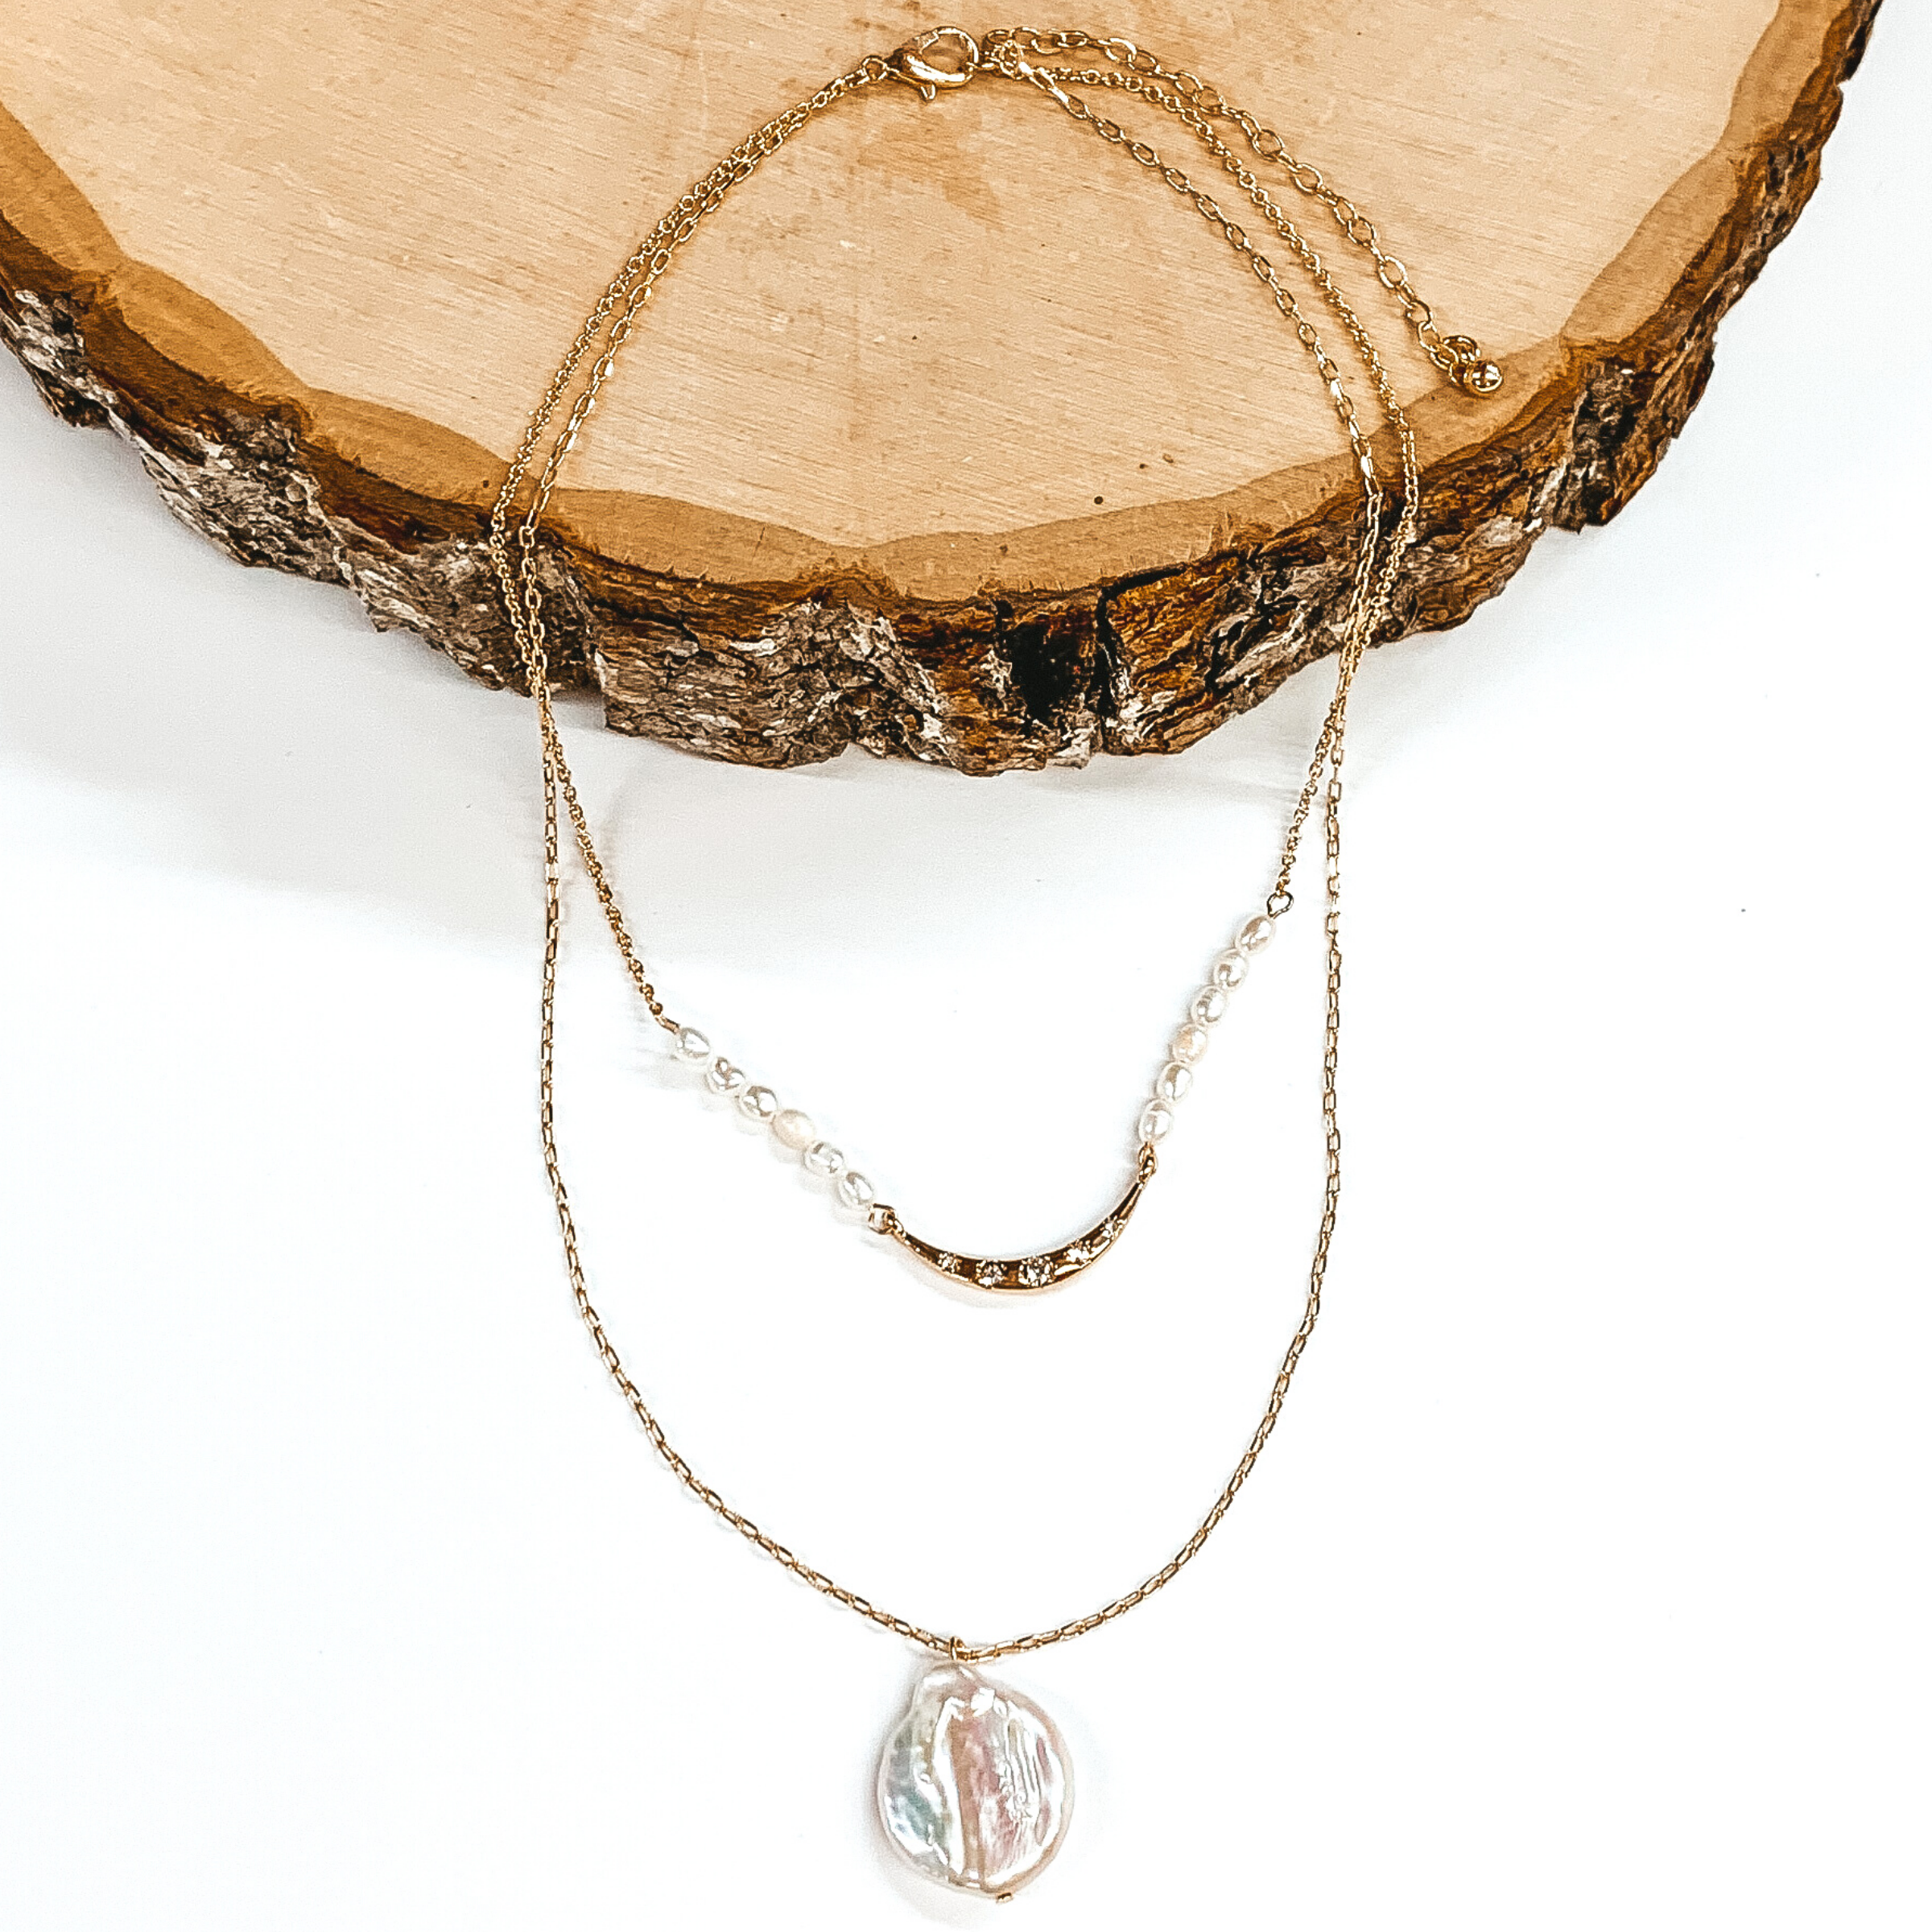 Gold double layered necklace. The shorter chain has a middle gold bar with white beads on either side of the bar. The longer strand has a single white pendant. This necklace is pictured laying partially on a piece of wood on a white background.